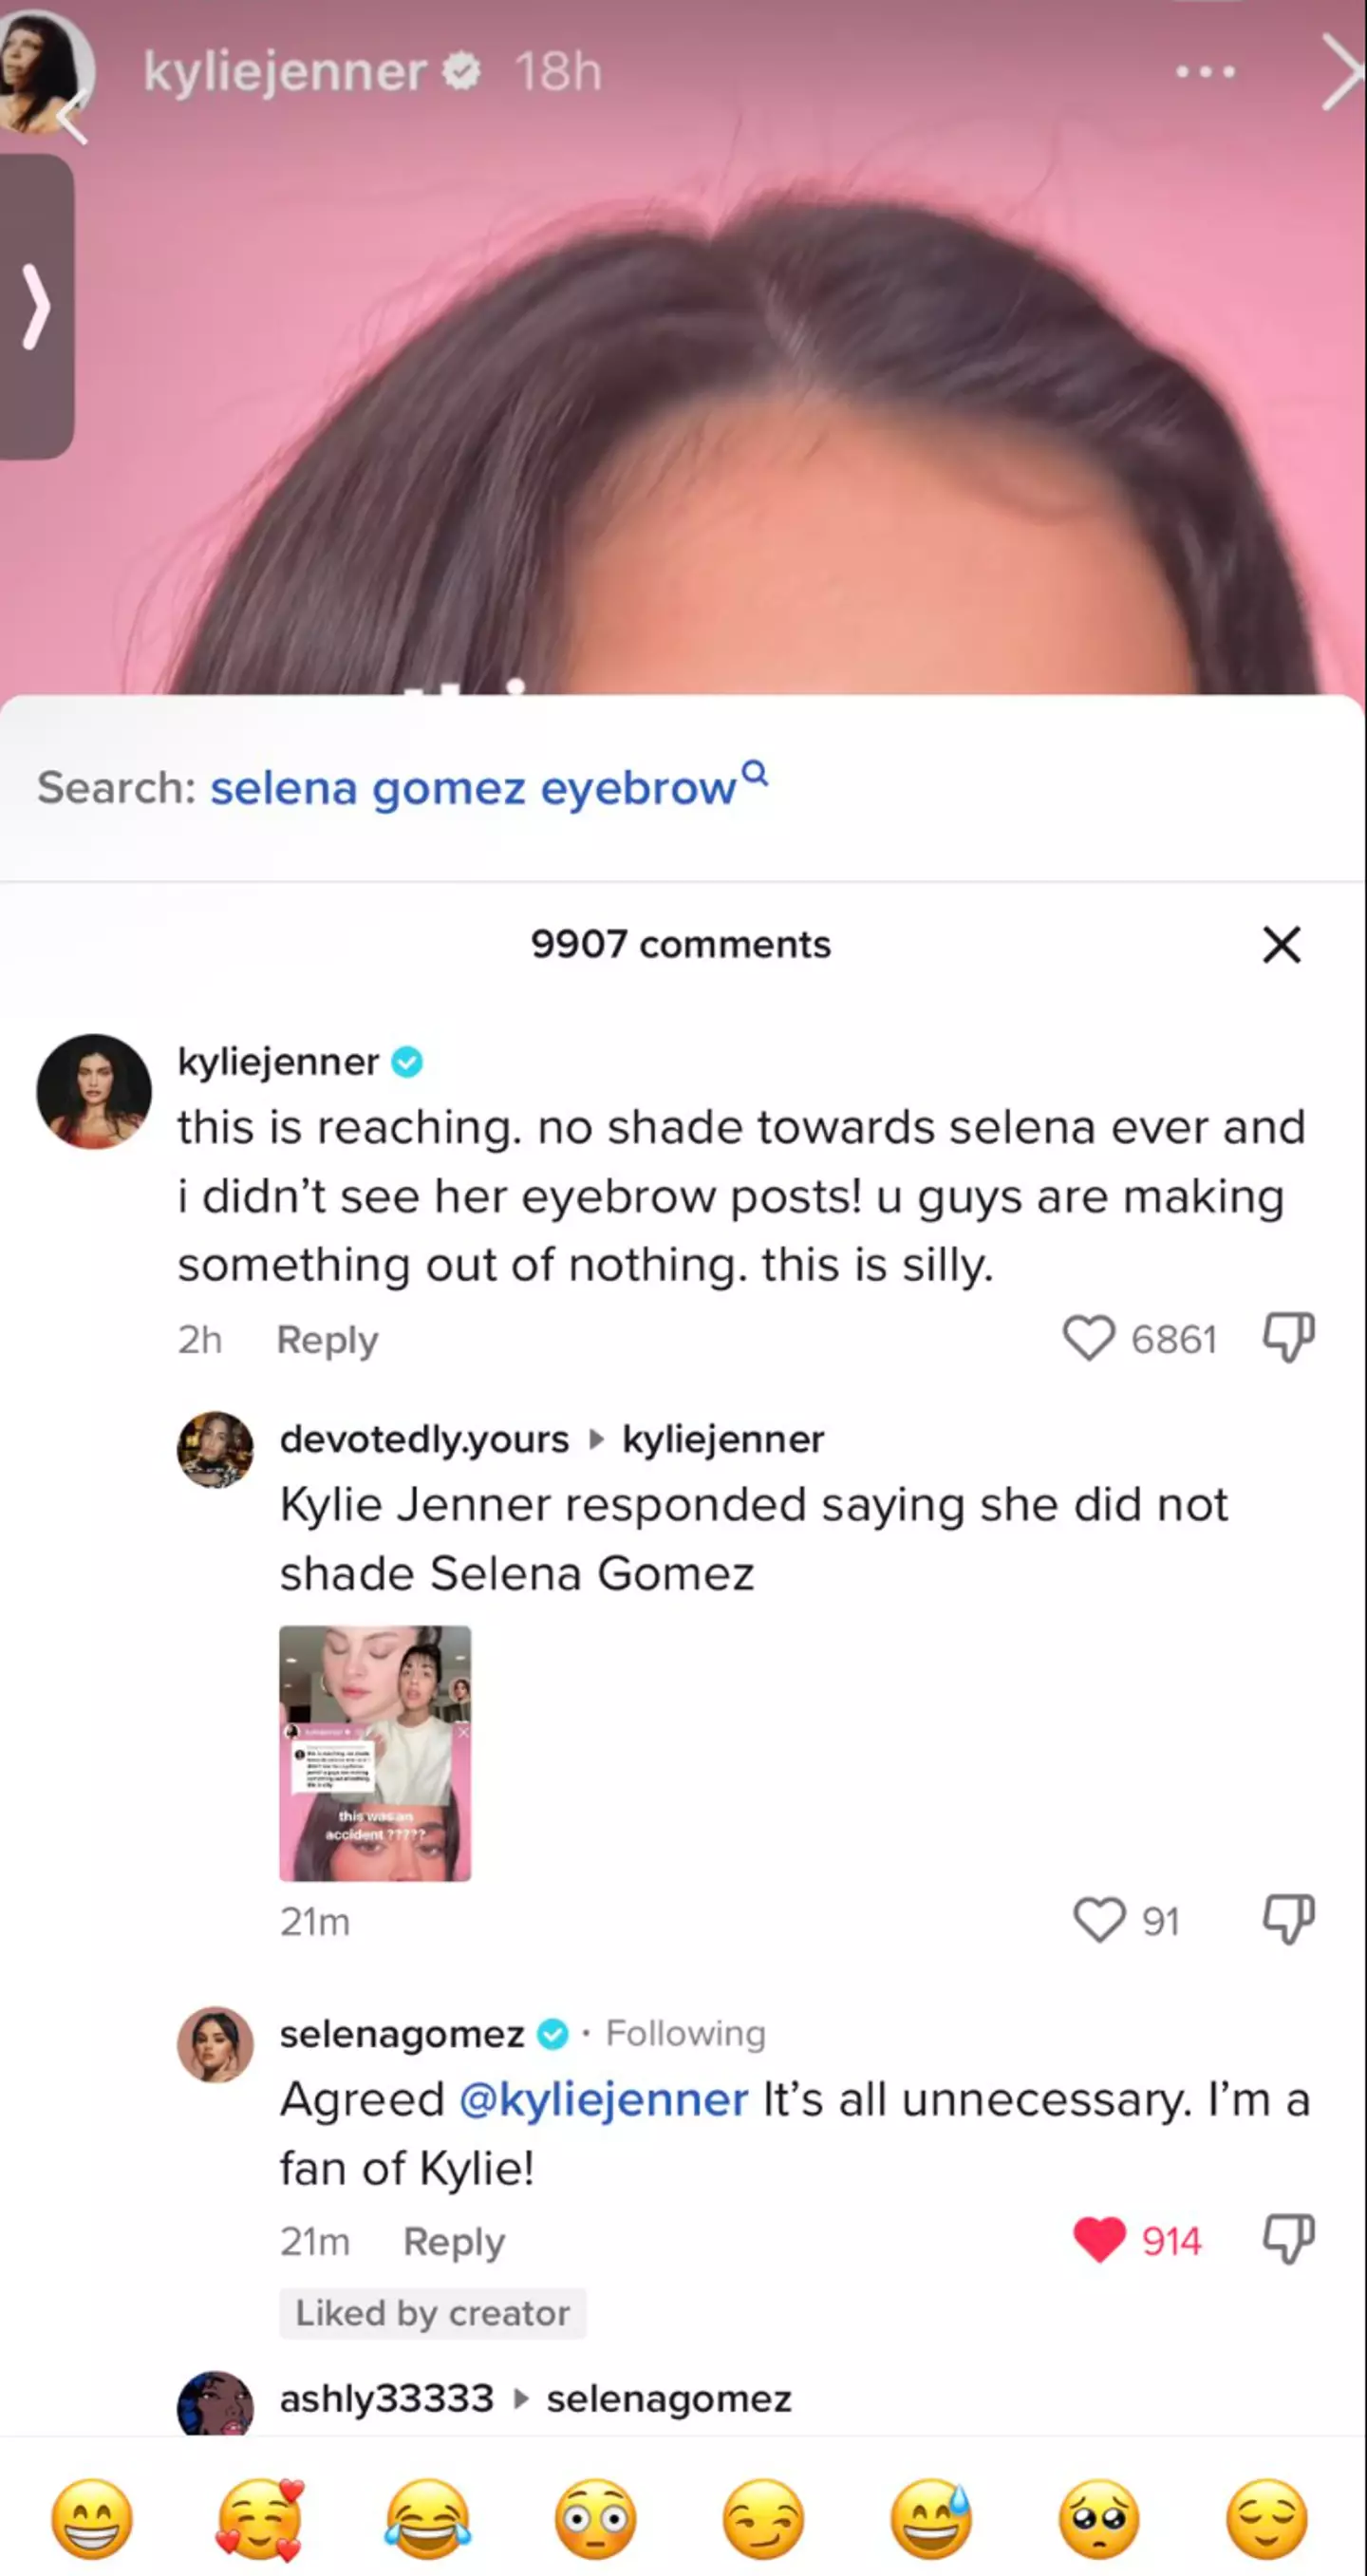 Kylie responded to the video.